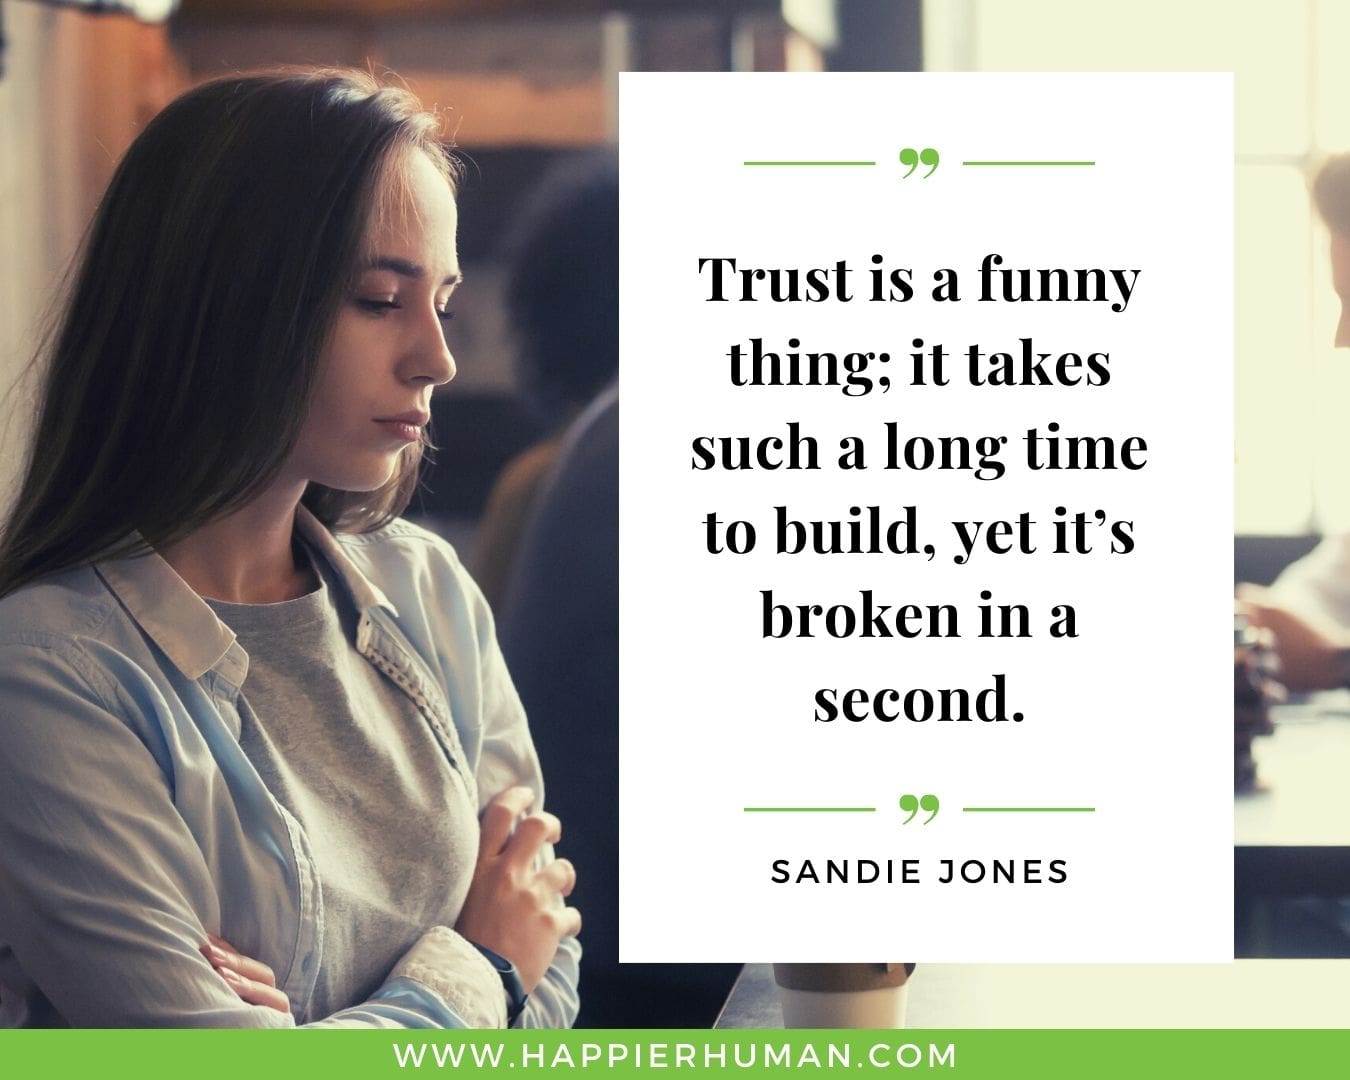 Broken Trust Quotes - “Trust is a funny thing; it takes such a long time to build, yet it’s broken in a second.” - Sandie Jones